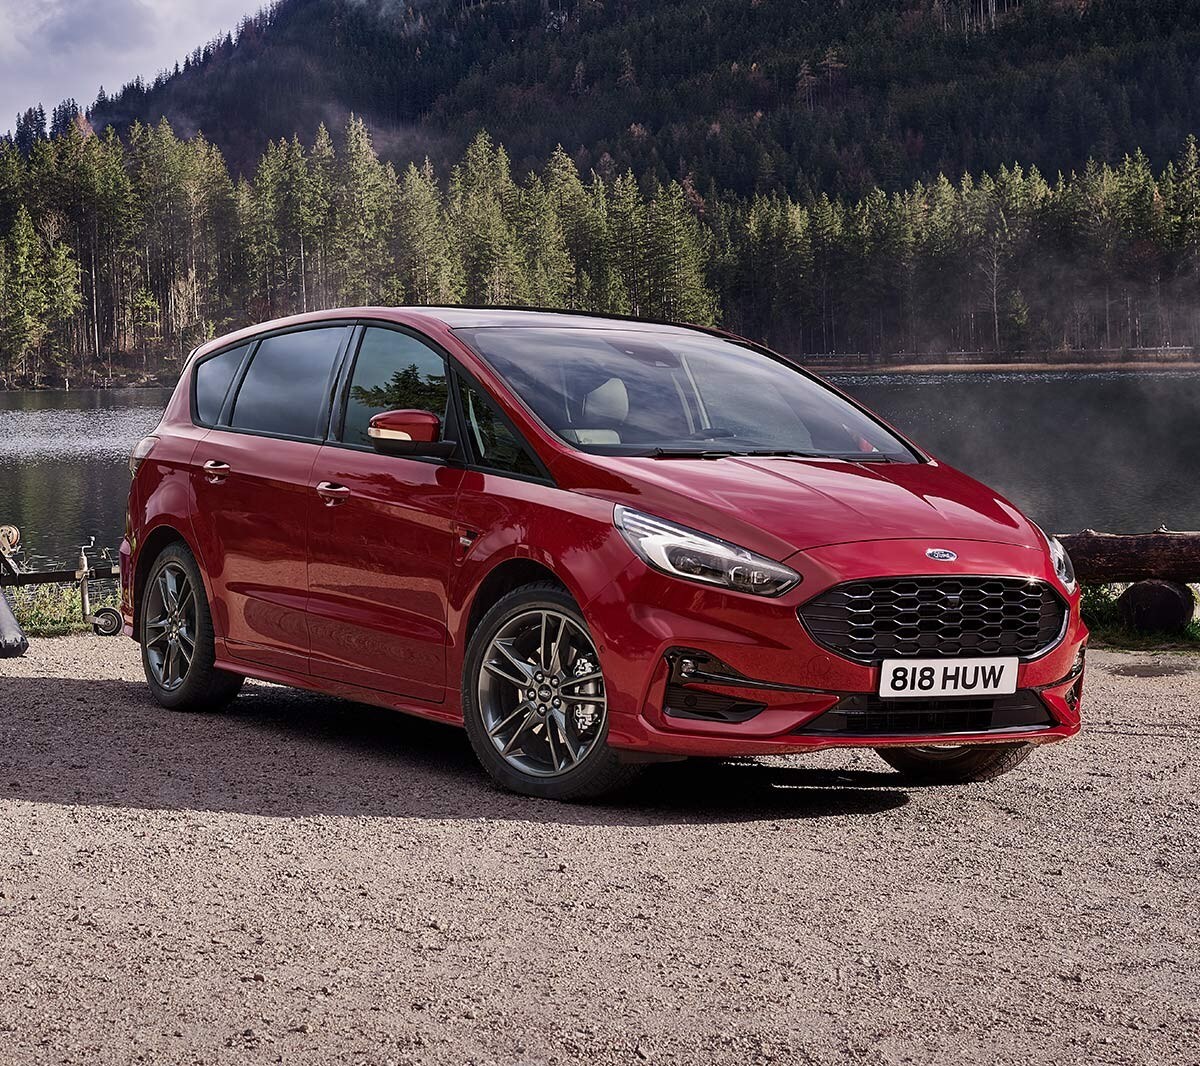 Ford S-MAX in Rot. ¾-Frontansicht. An einem See parkend